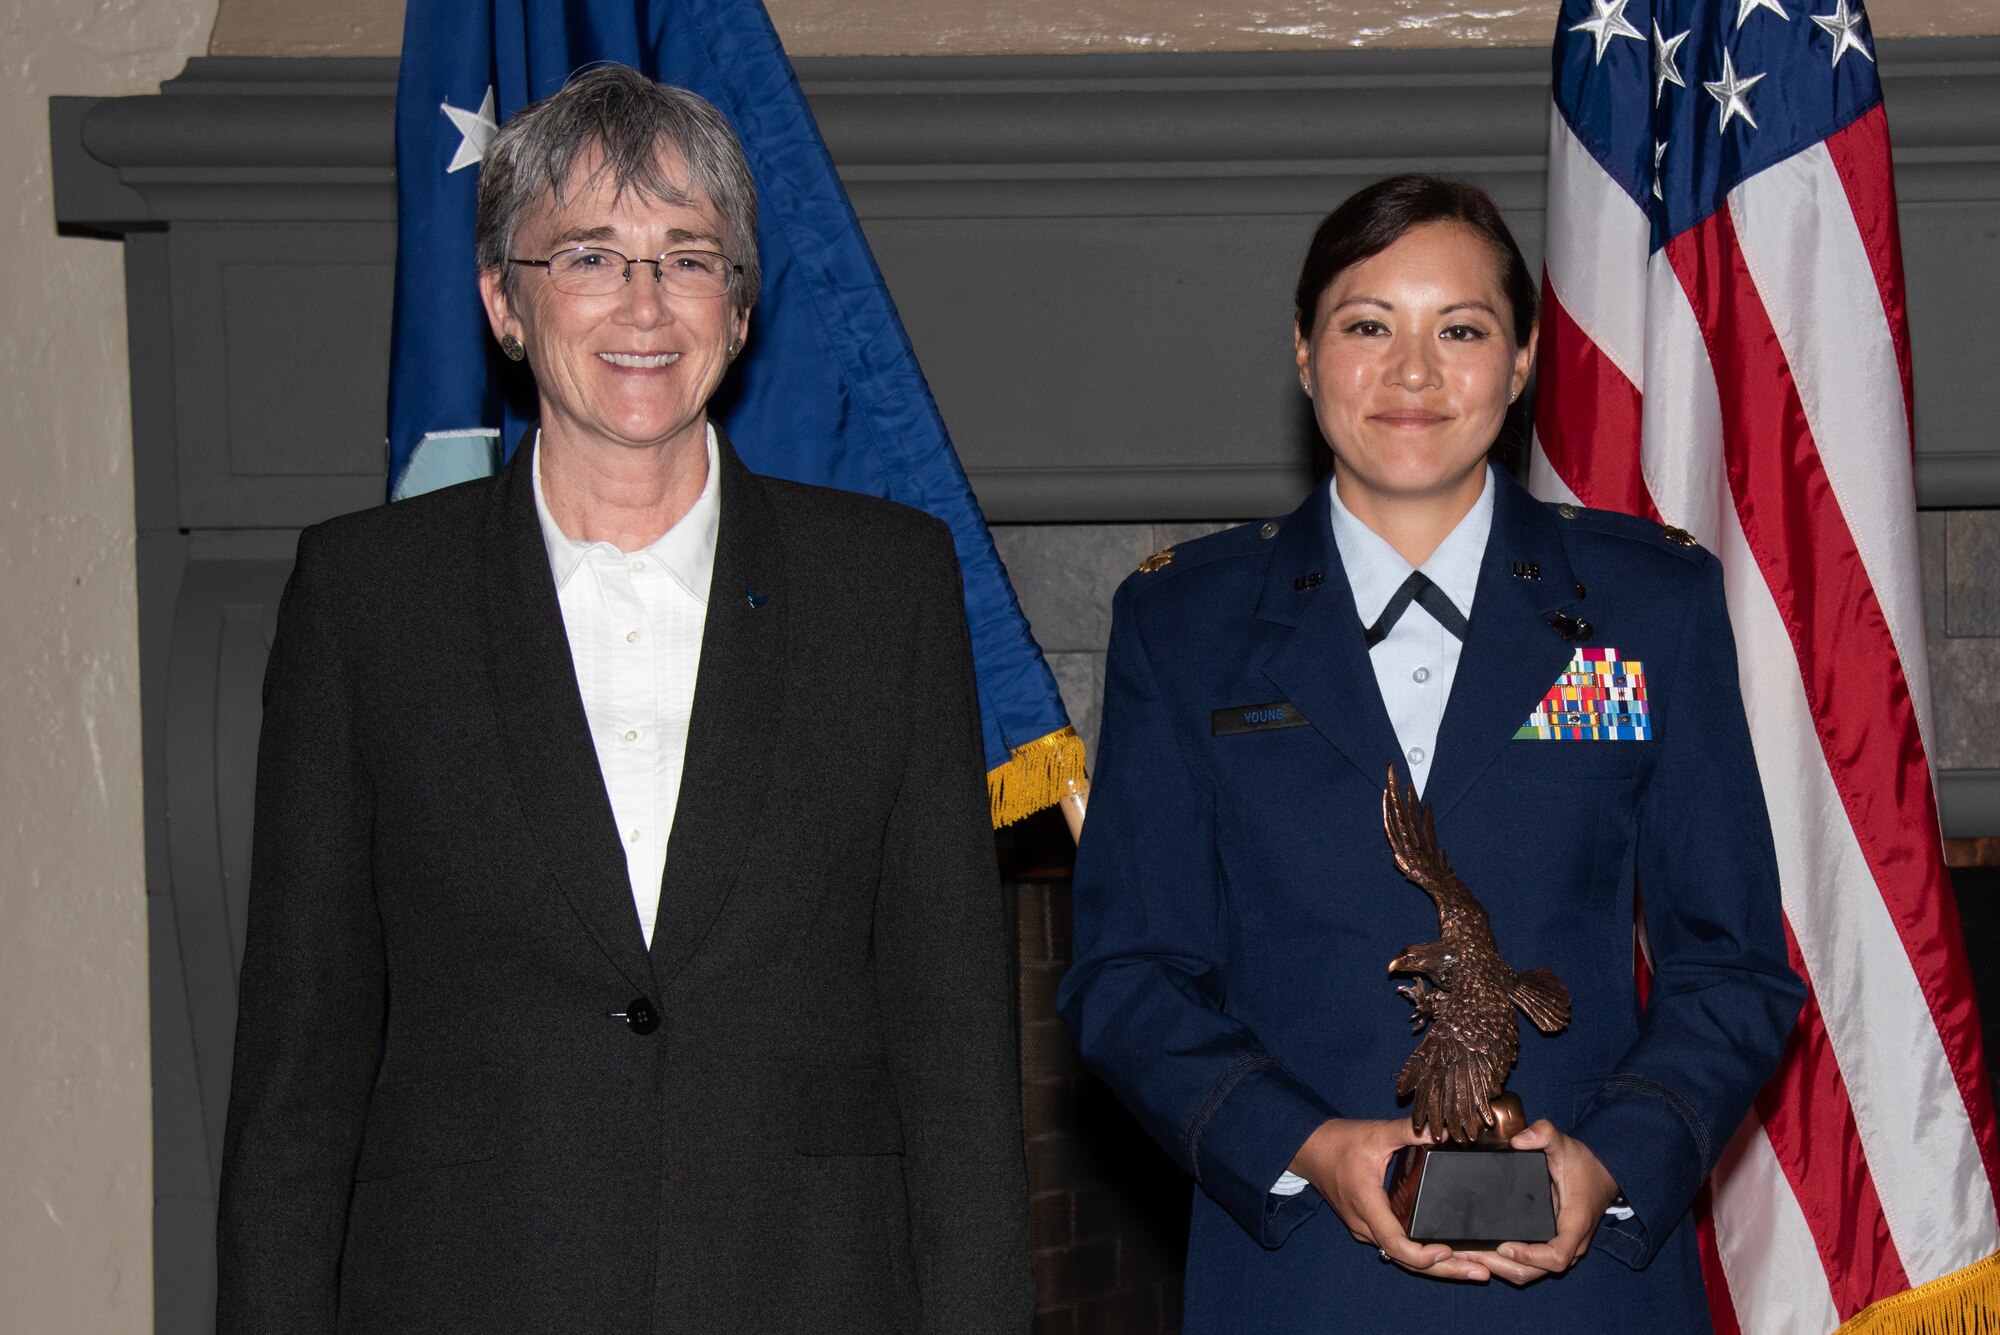 Secretary of the Air Force Heather Wilson, left, presents Maj. Paige Young, Air Command and Staff College student, right, with the 2019 Secretary of the Air Force Leadership Award May 14, 2019, at Maxwell Air Force Base, Alabama. Young was responsible for co-hosting podcasts on hypersonic weapons research and new a new Air Force career field, organized the ACSC Holiday food drive and an ACSC Hurricane Michael relief effort, gathering more than 320 pounds of food for the local Montgomery community.